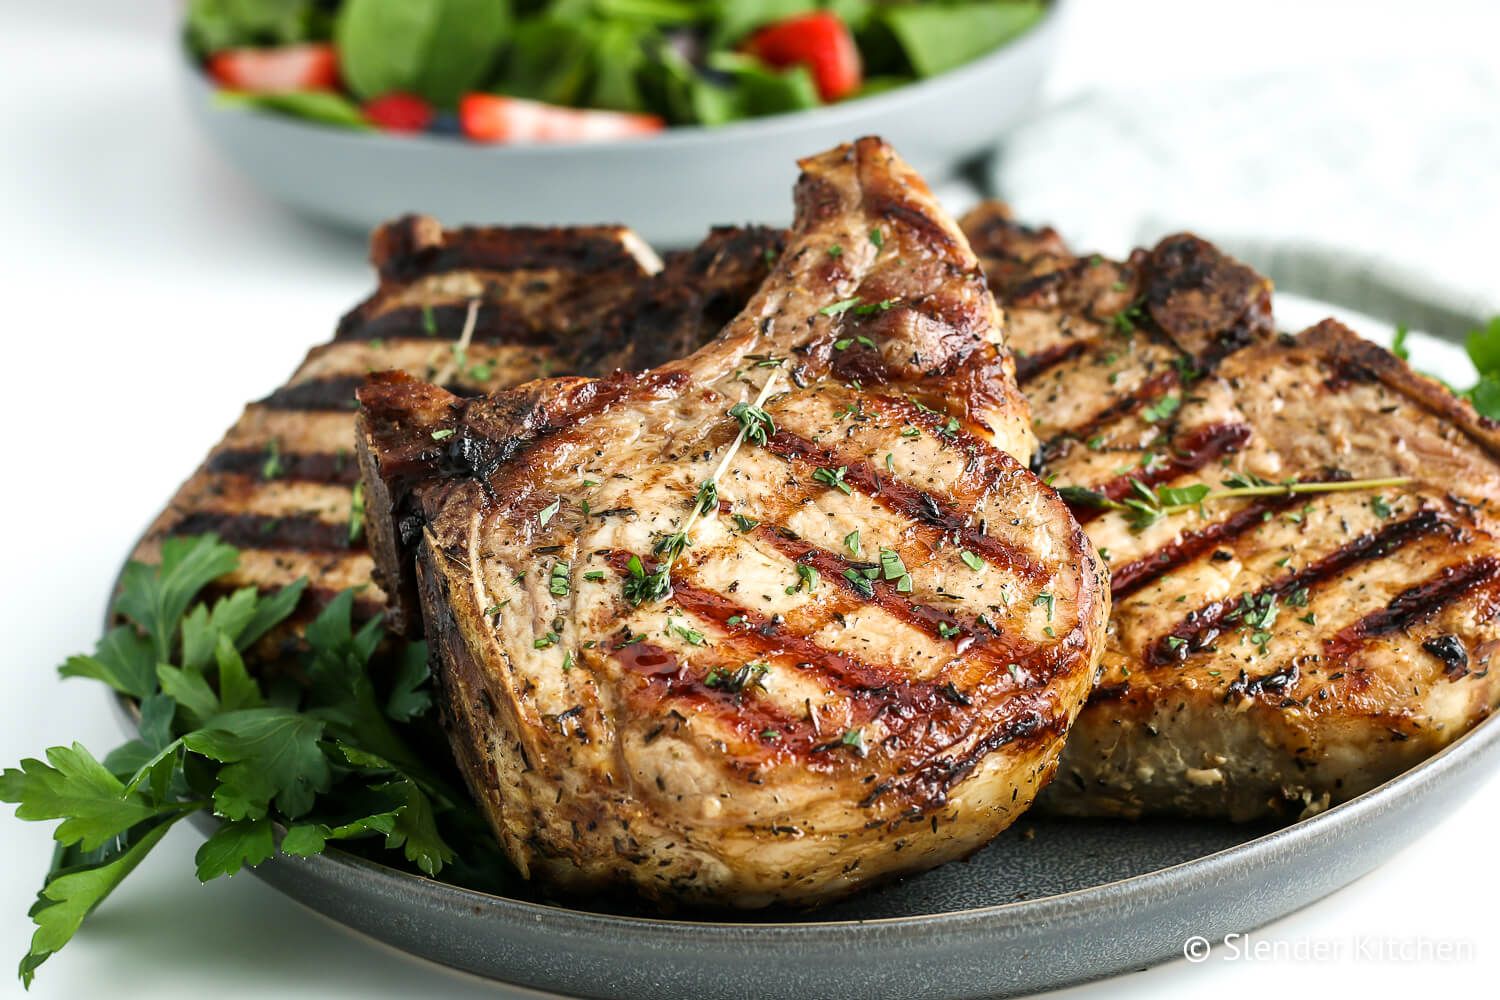 Grilled Pork Chops on a plate with a salad.